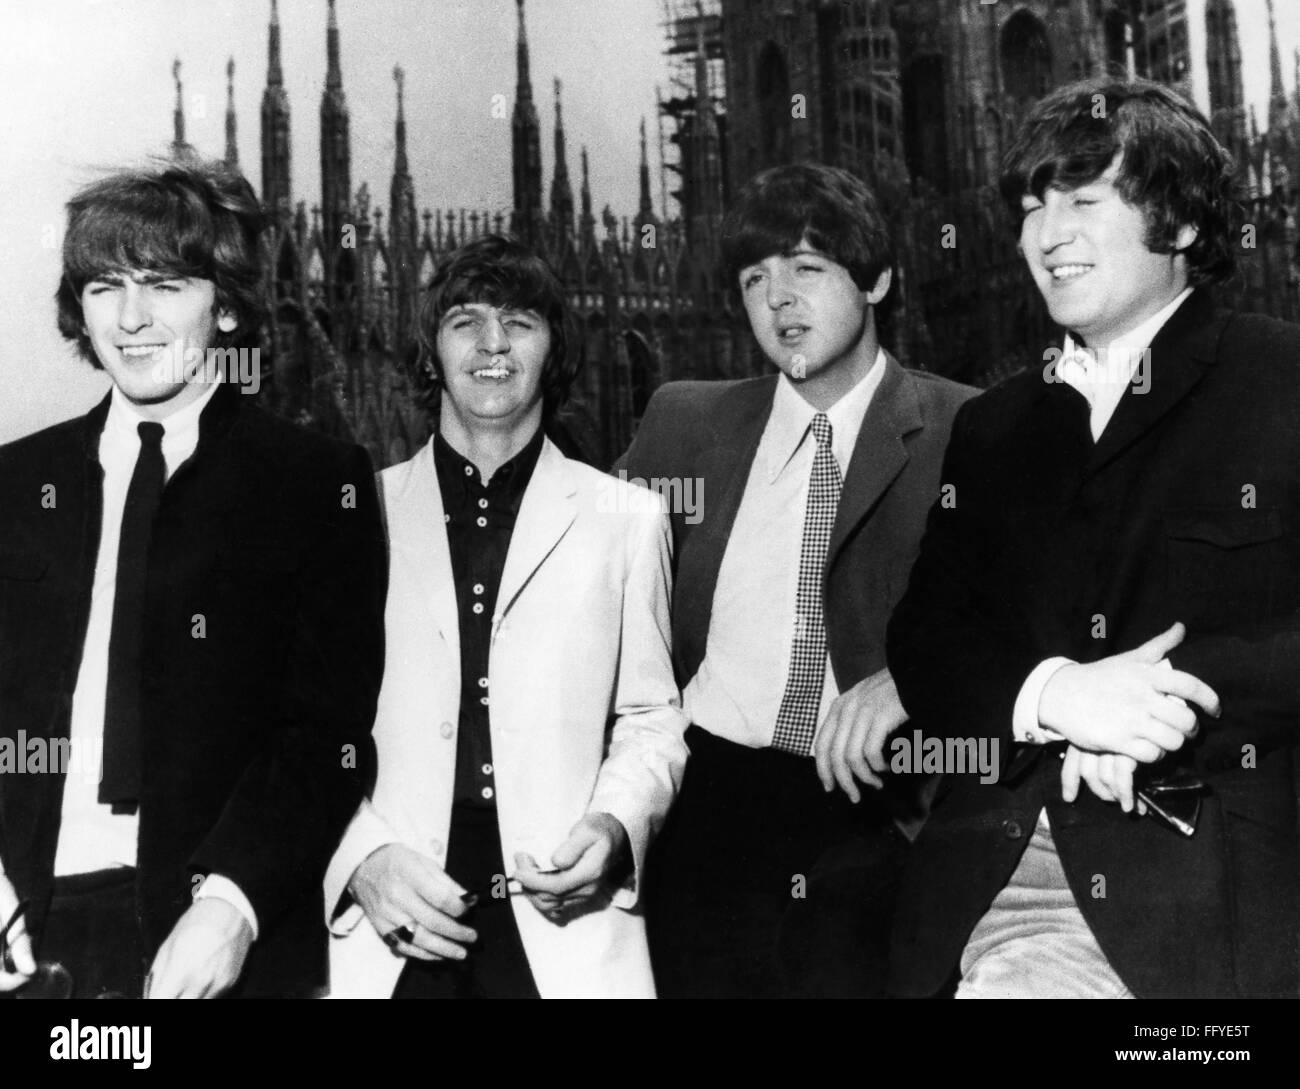 THE BEATLES, 1965. /nThe Beatles in Milan, Italy. Photograph, 1965. Left to right: George Harrison, Ringo Starr, Paul McCartney and John Lennon. Stock Photo